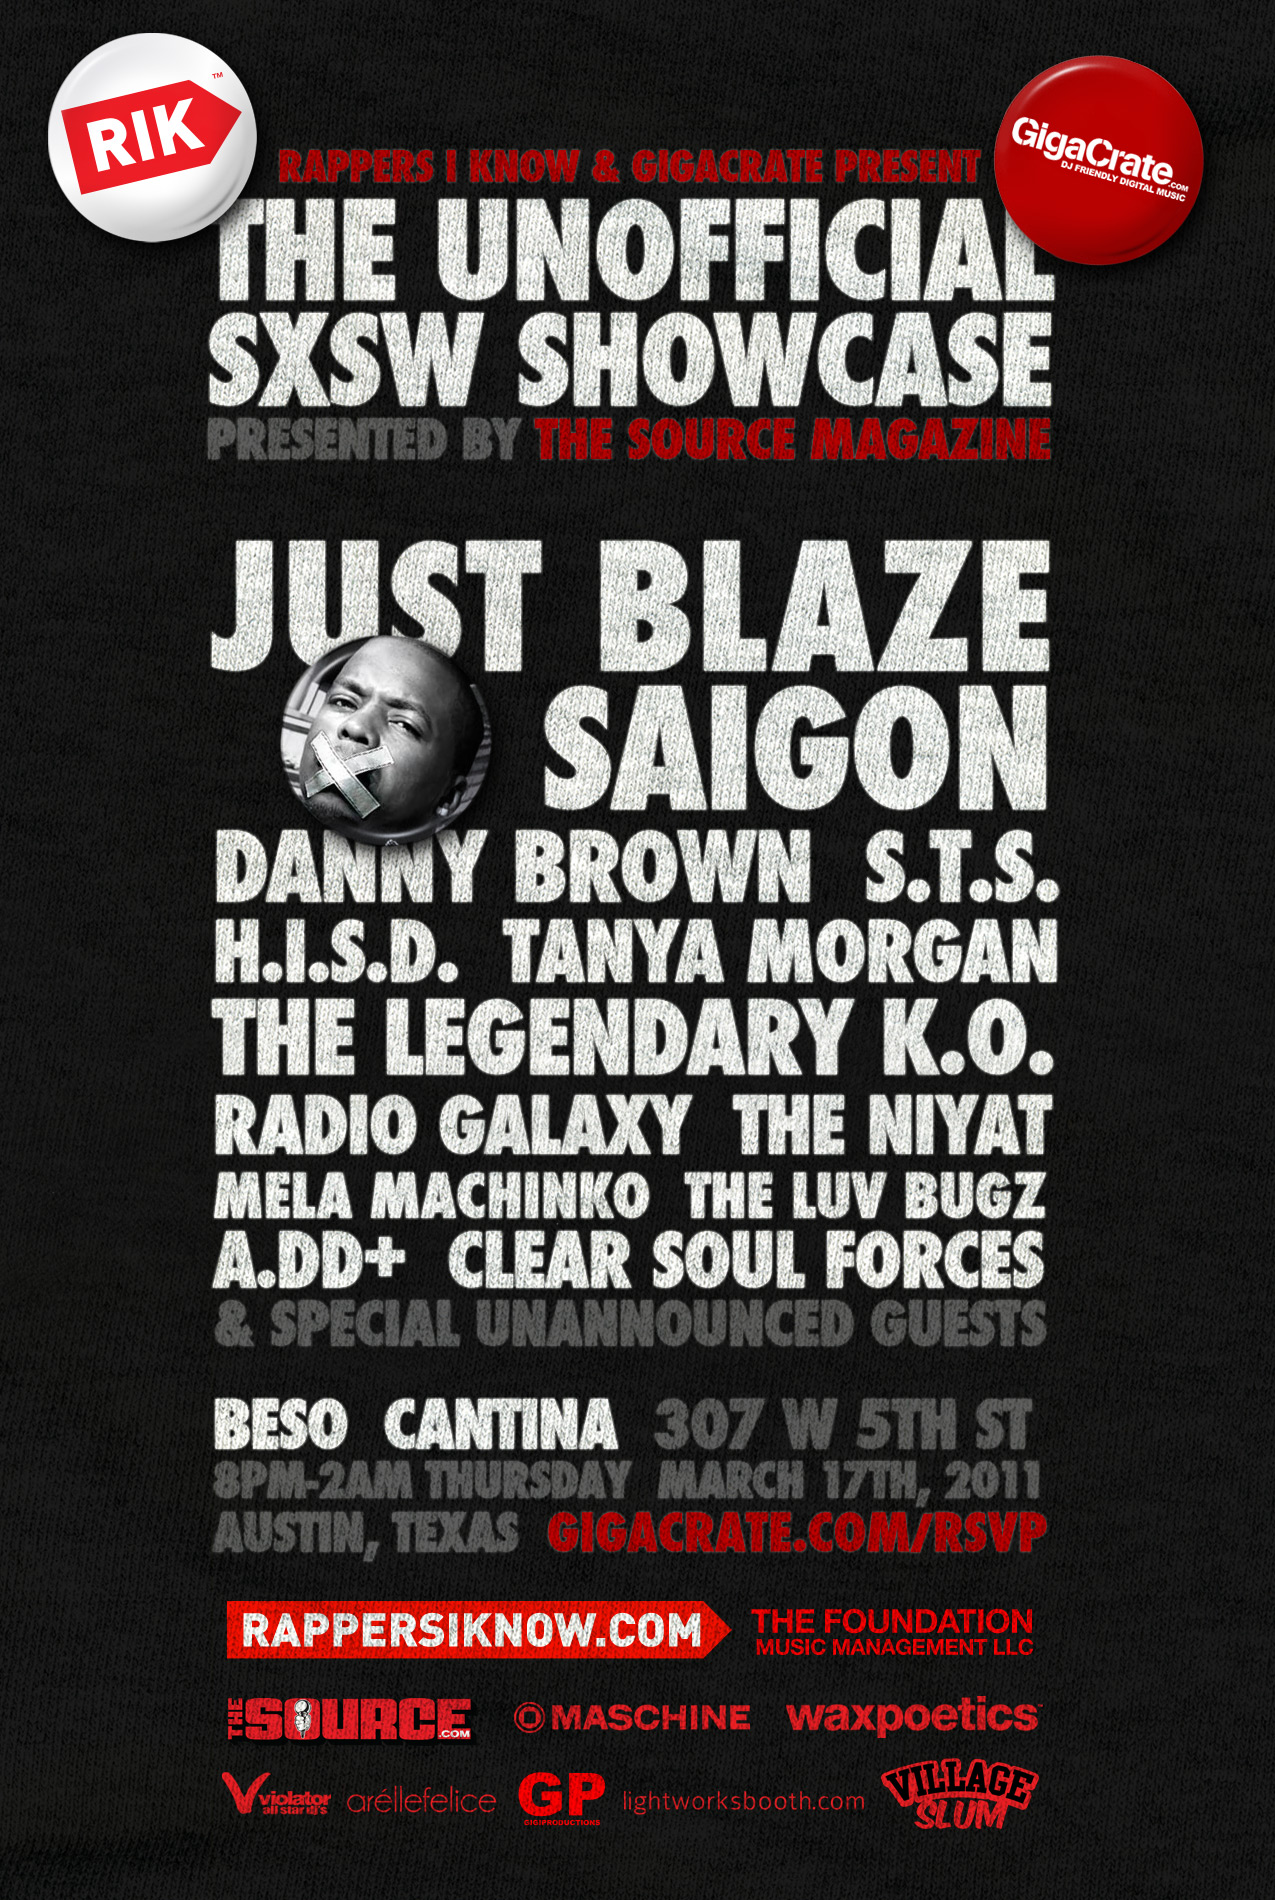 Rappers I Know x Gigacrate Present The Unofficial SXSW Showcase. Thursday, March 17th at Beso Cantina